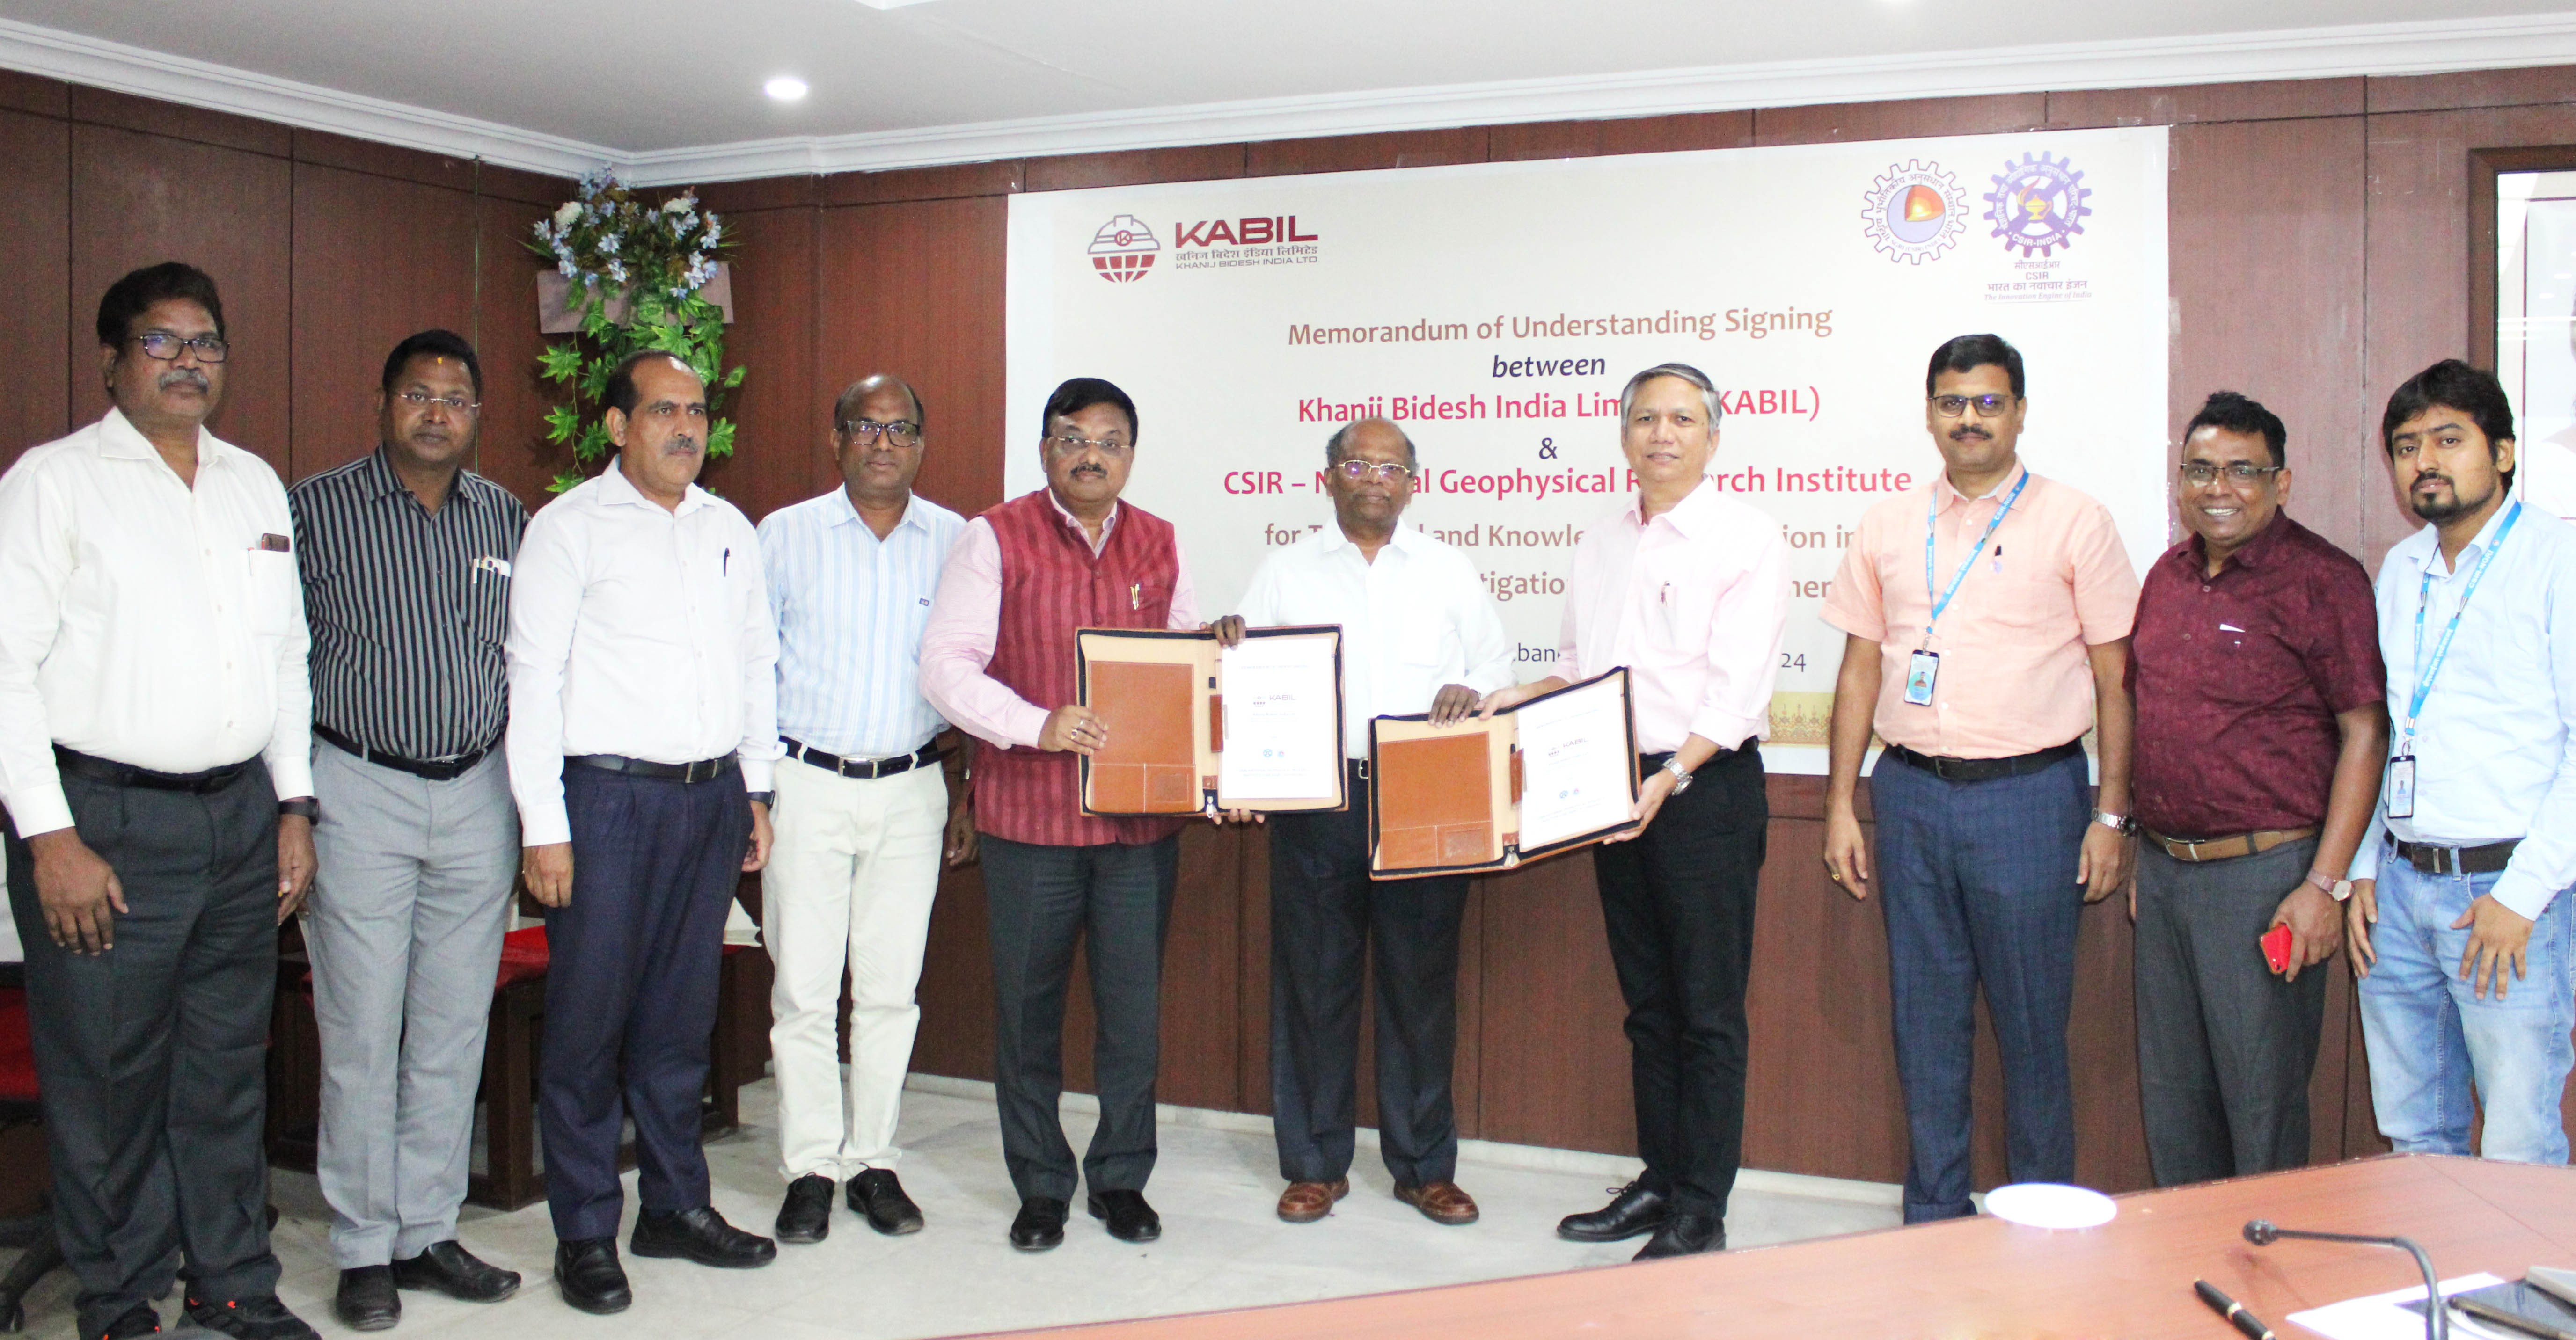 Project-Your-State-kabil-inks-mou-with-csir-ngri-for-advancing-geophysical-investigations-in-critical-and-strategic-min